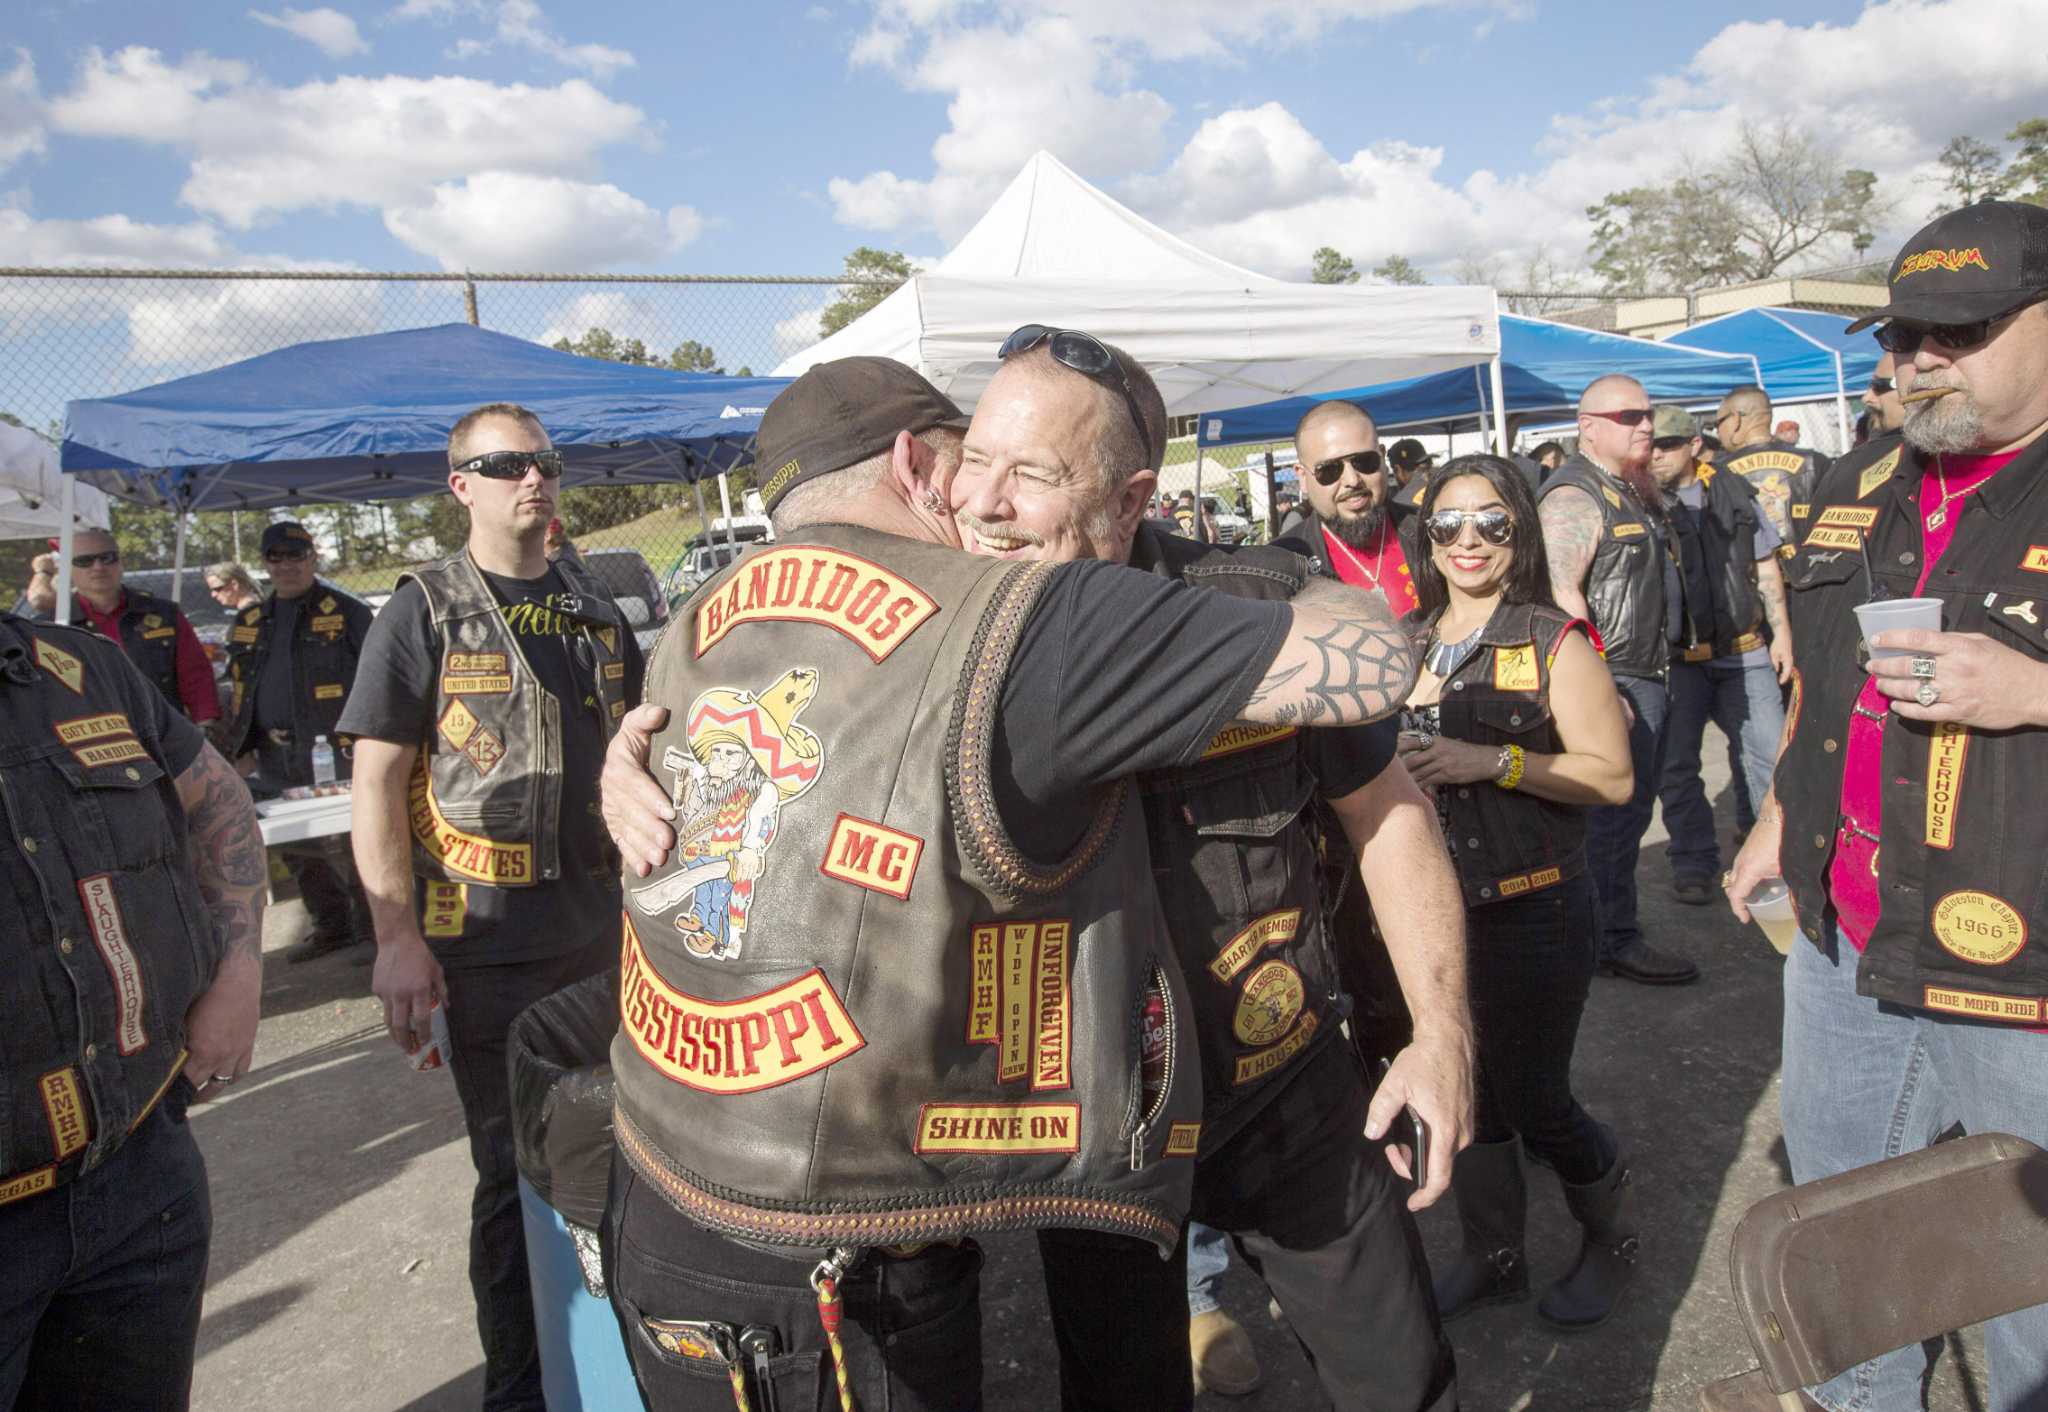 Bandidos Inc Tough as nails Riders Are Now A Nonprofit Group